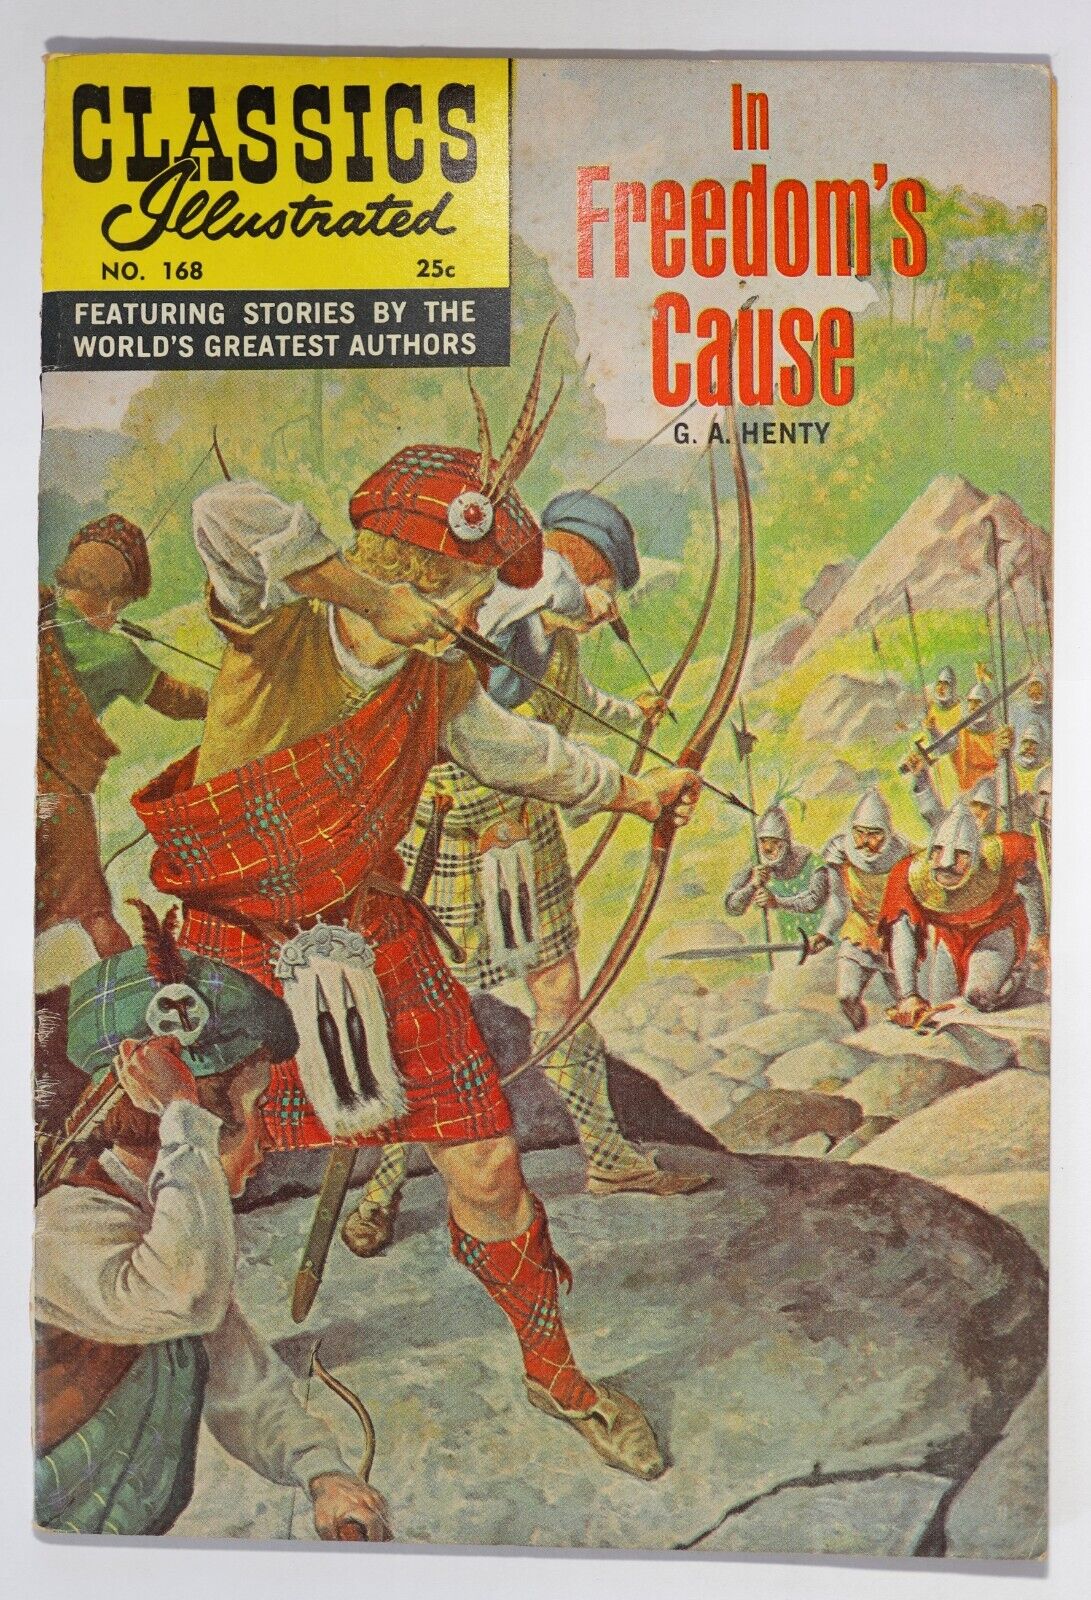 Classics Illustrated, In Freedom\'s Cause #168, $0.25 - 1st Ed. HRN 169 - VG+